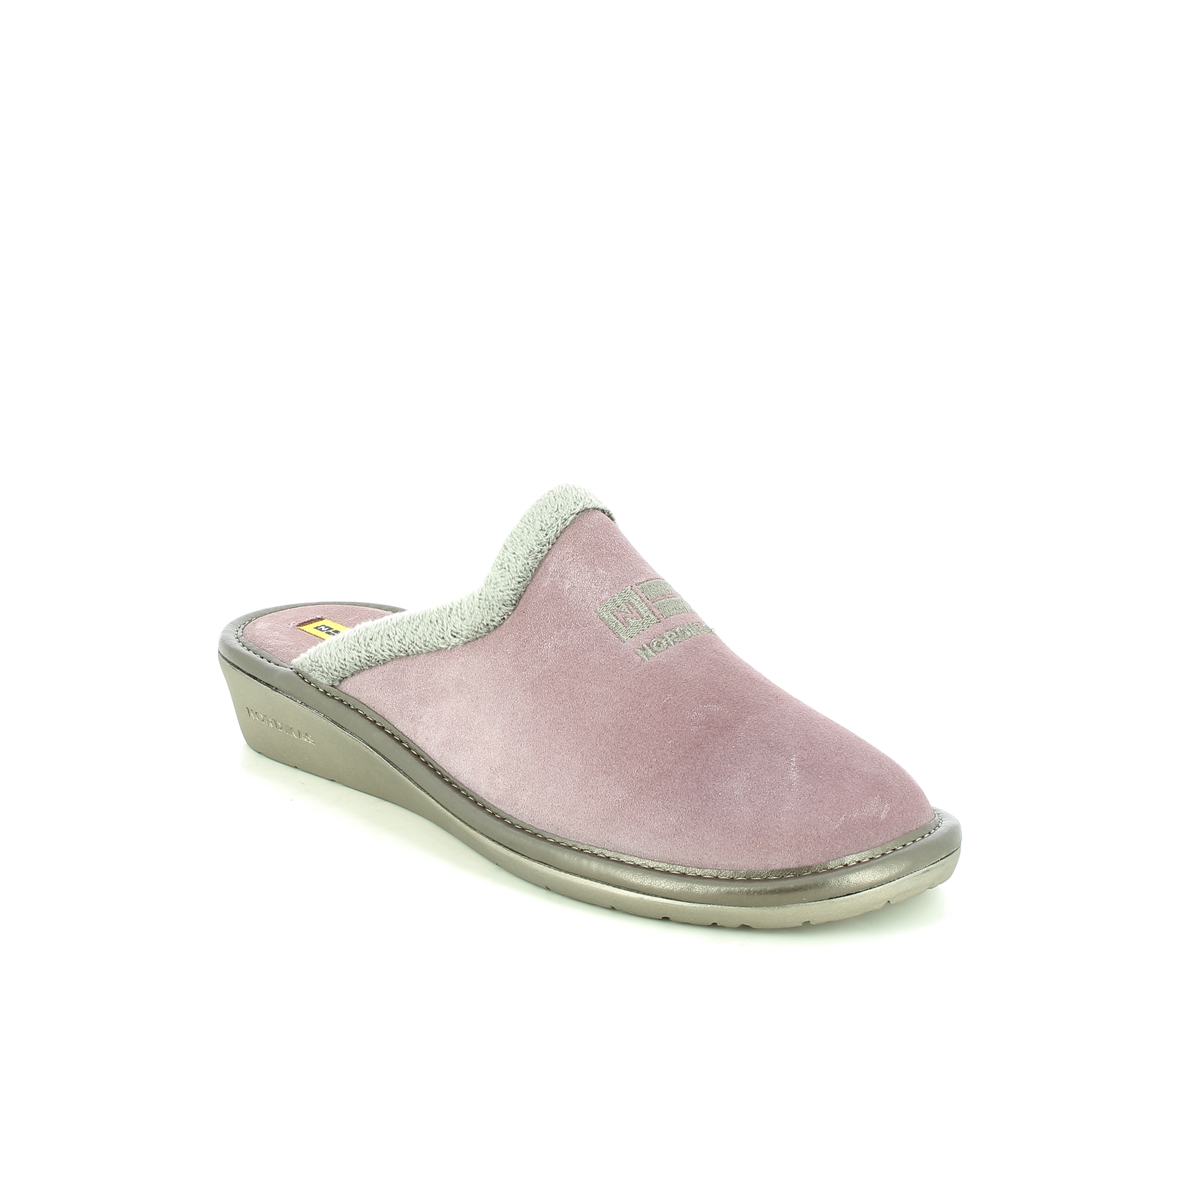 Nordikas Musue Pink Suede Womens Slipper Mules 238O-8   Natala 3 In Size 35 In Plain Pink Suede